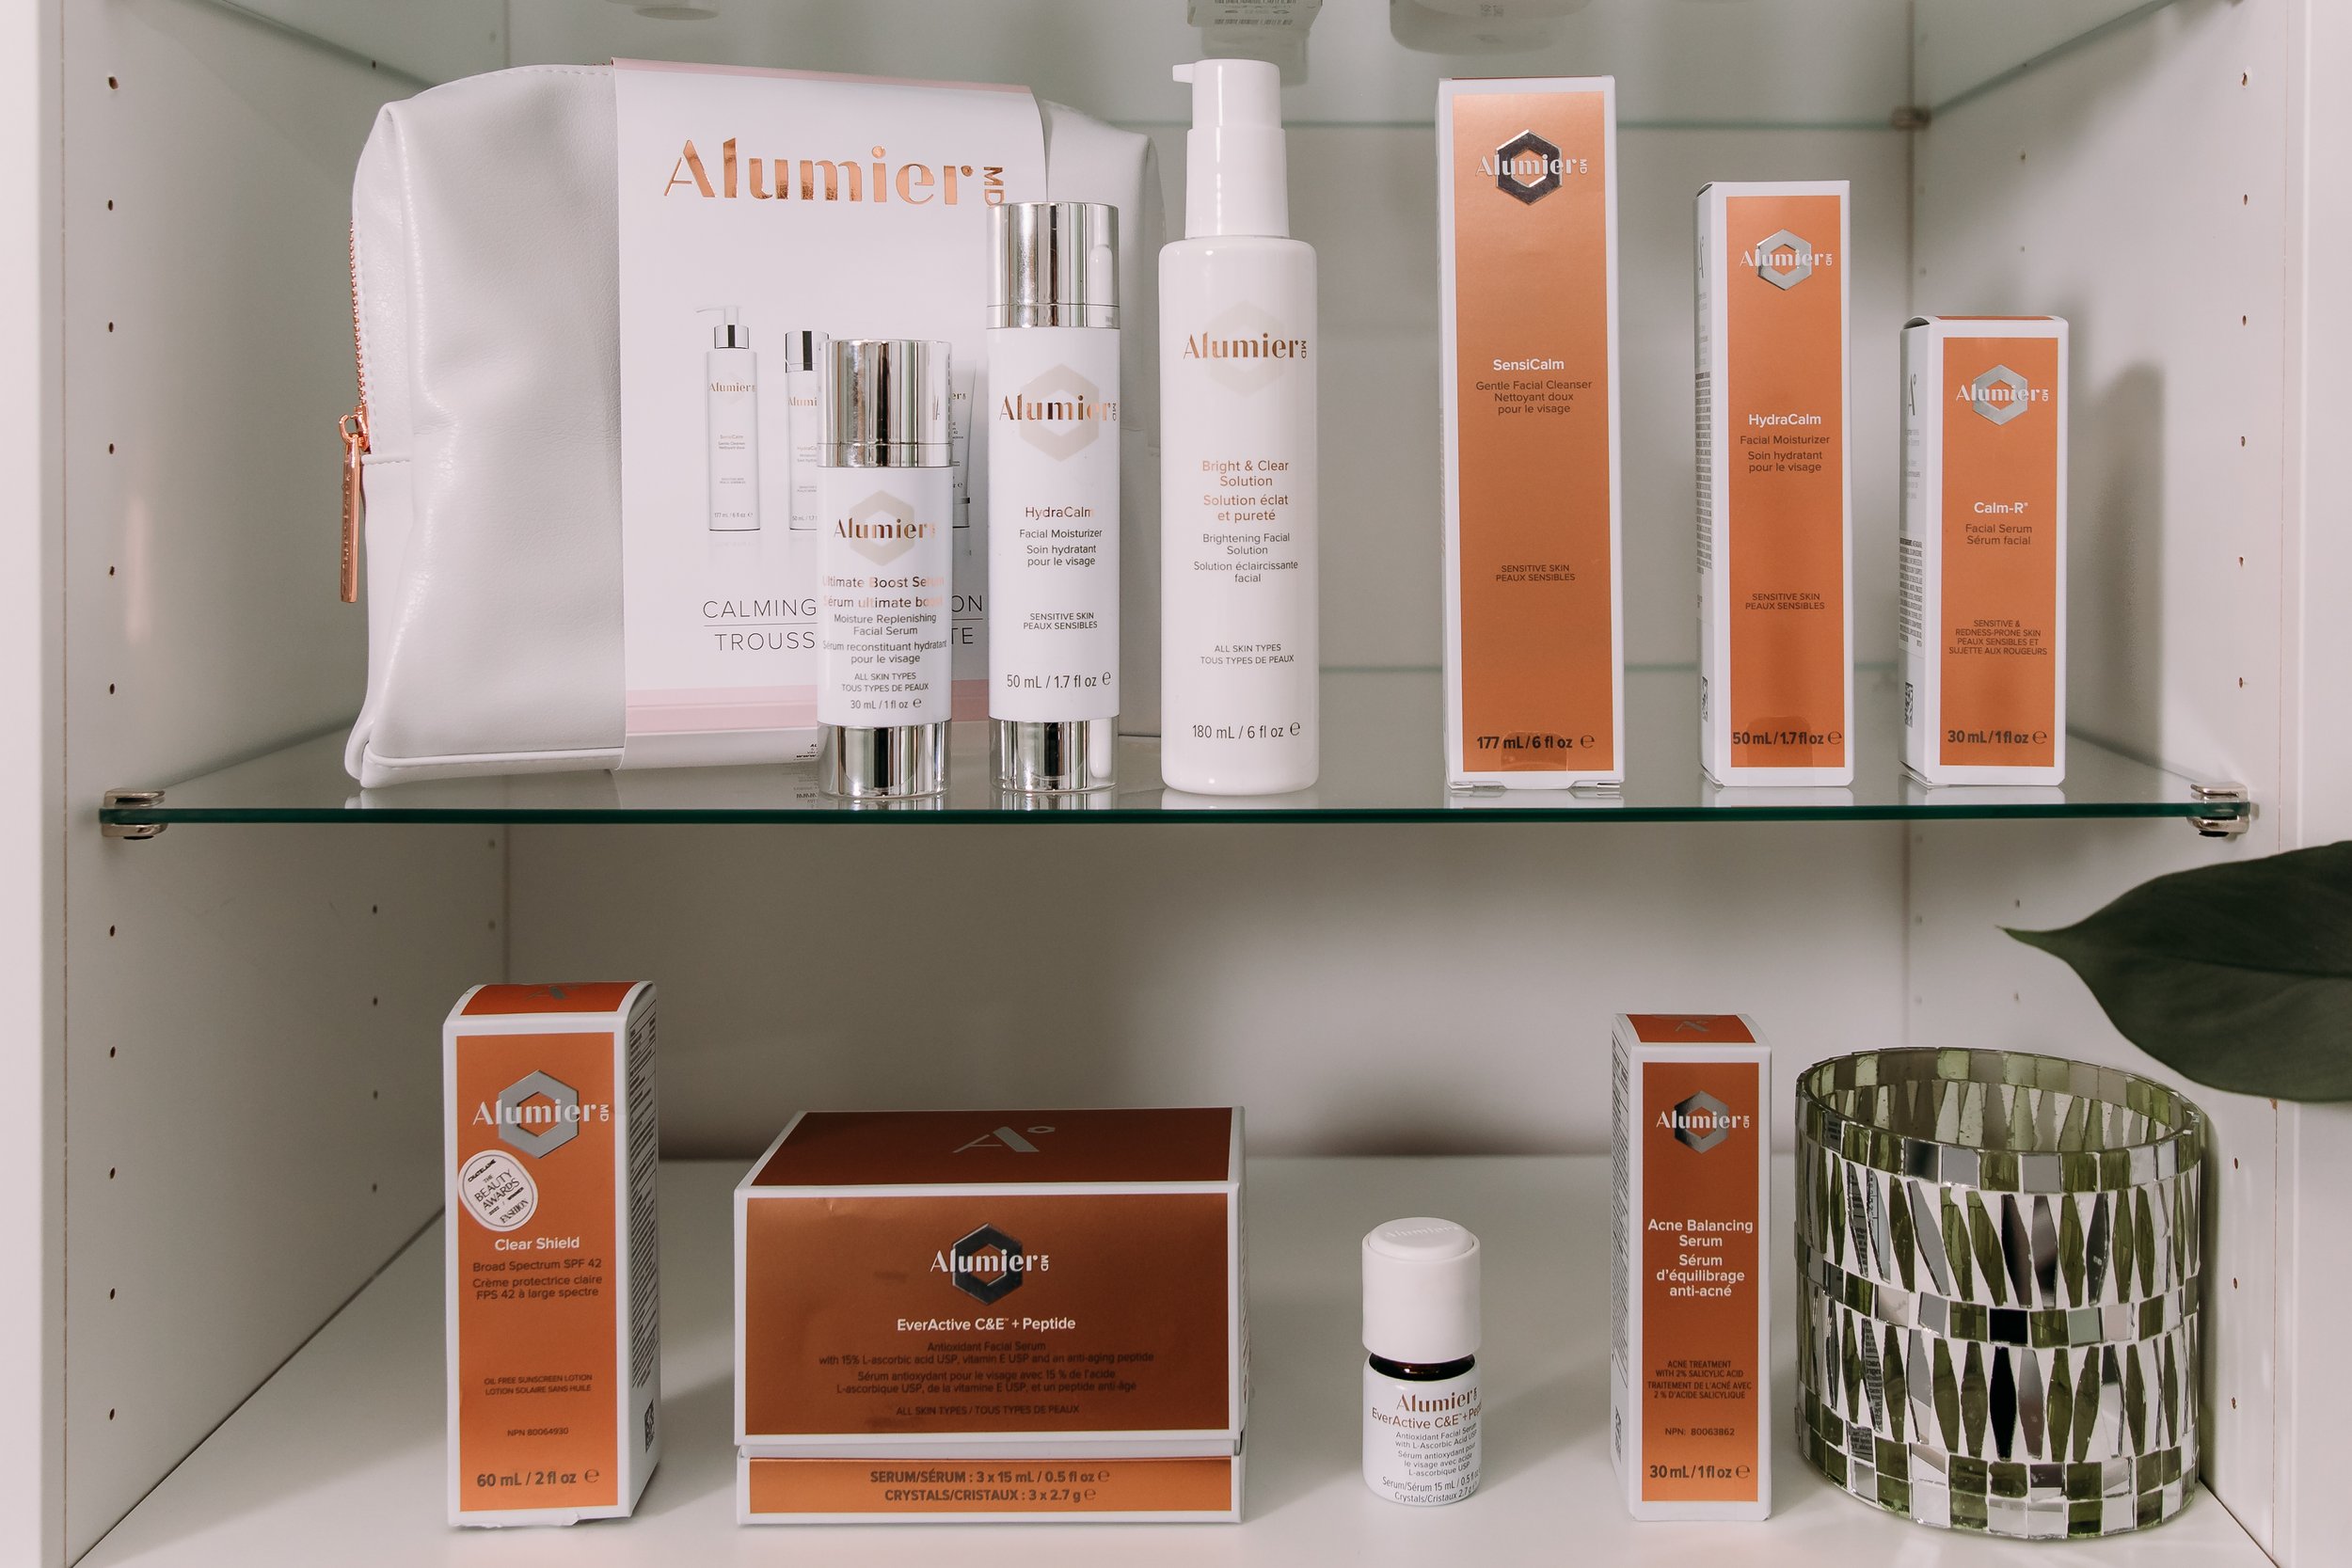 alumieremd-products.jpg